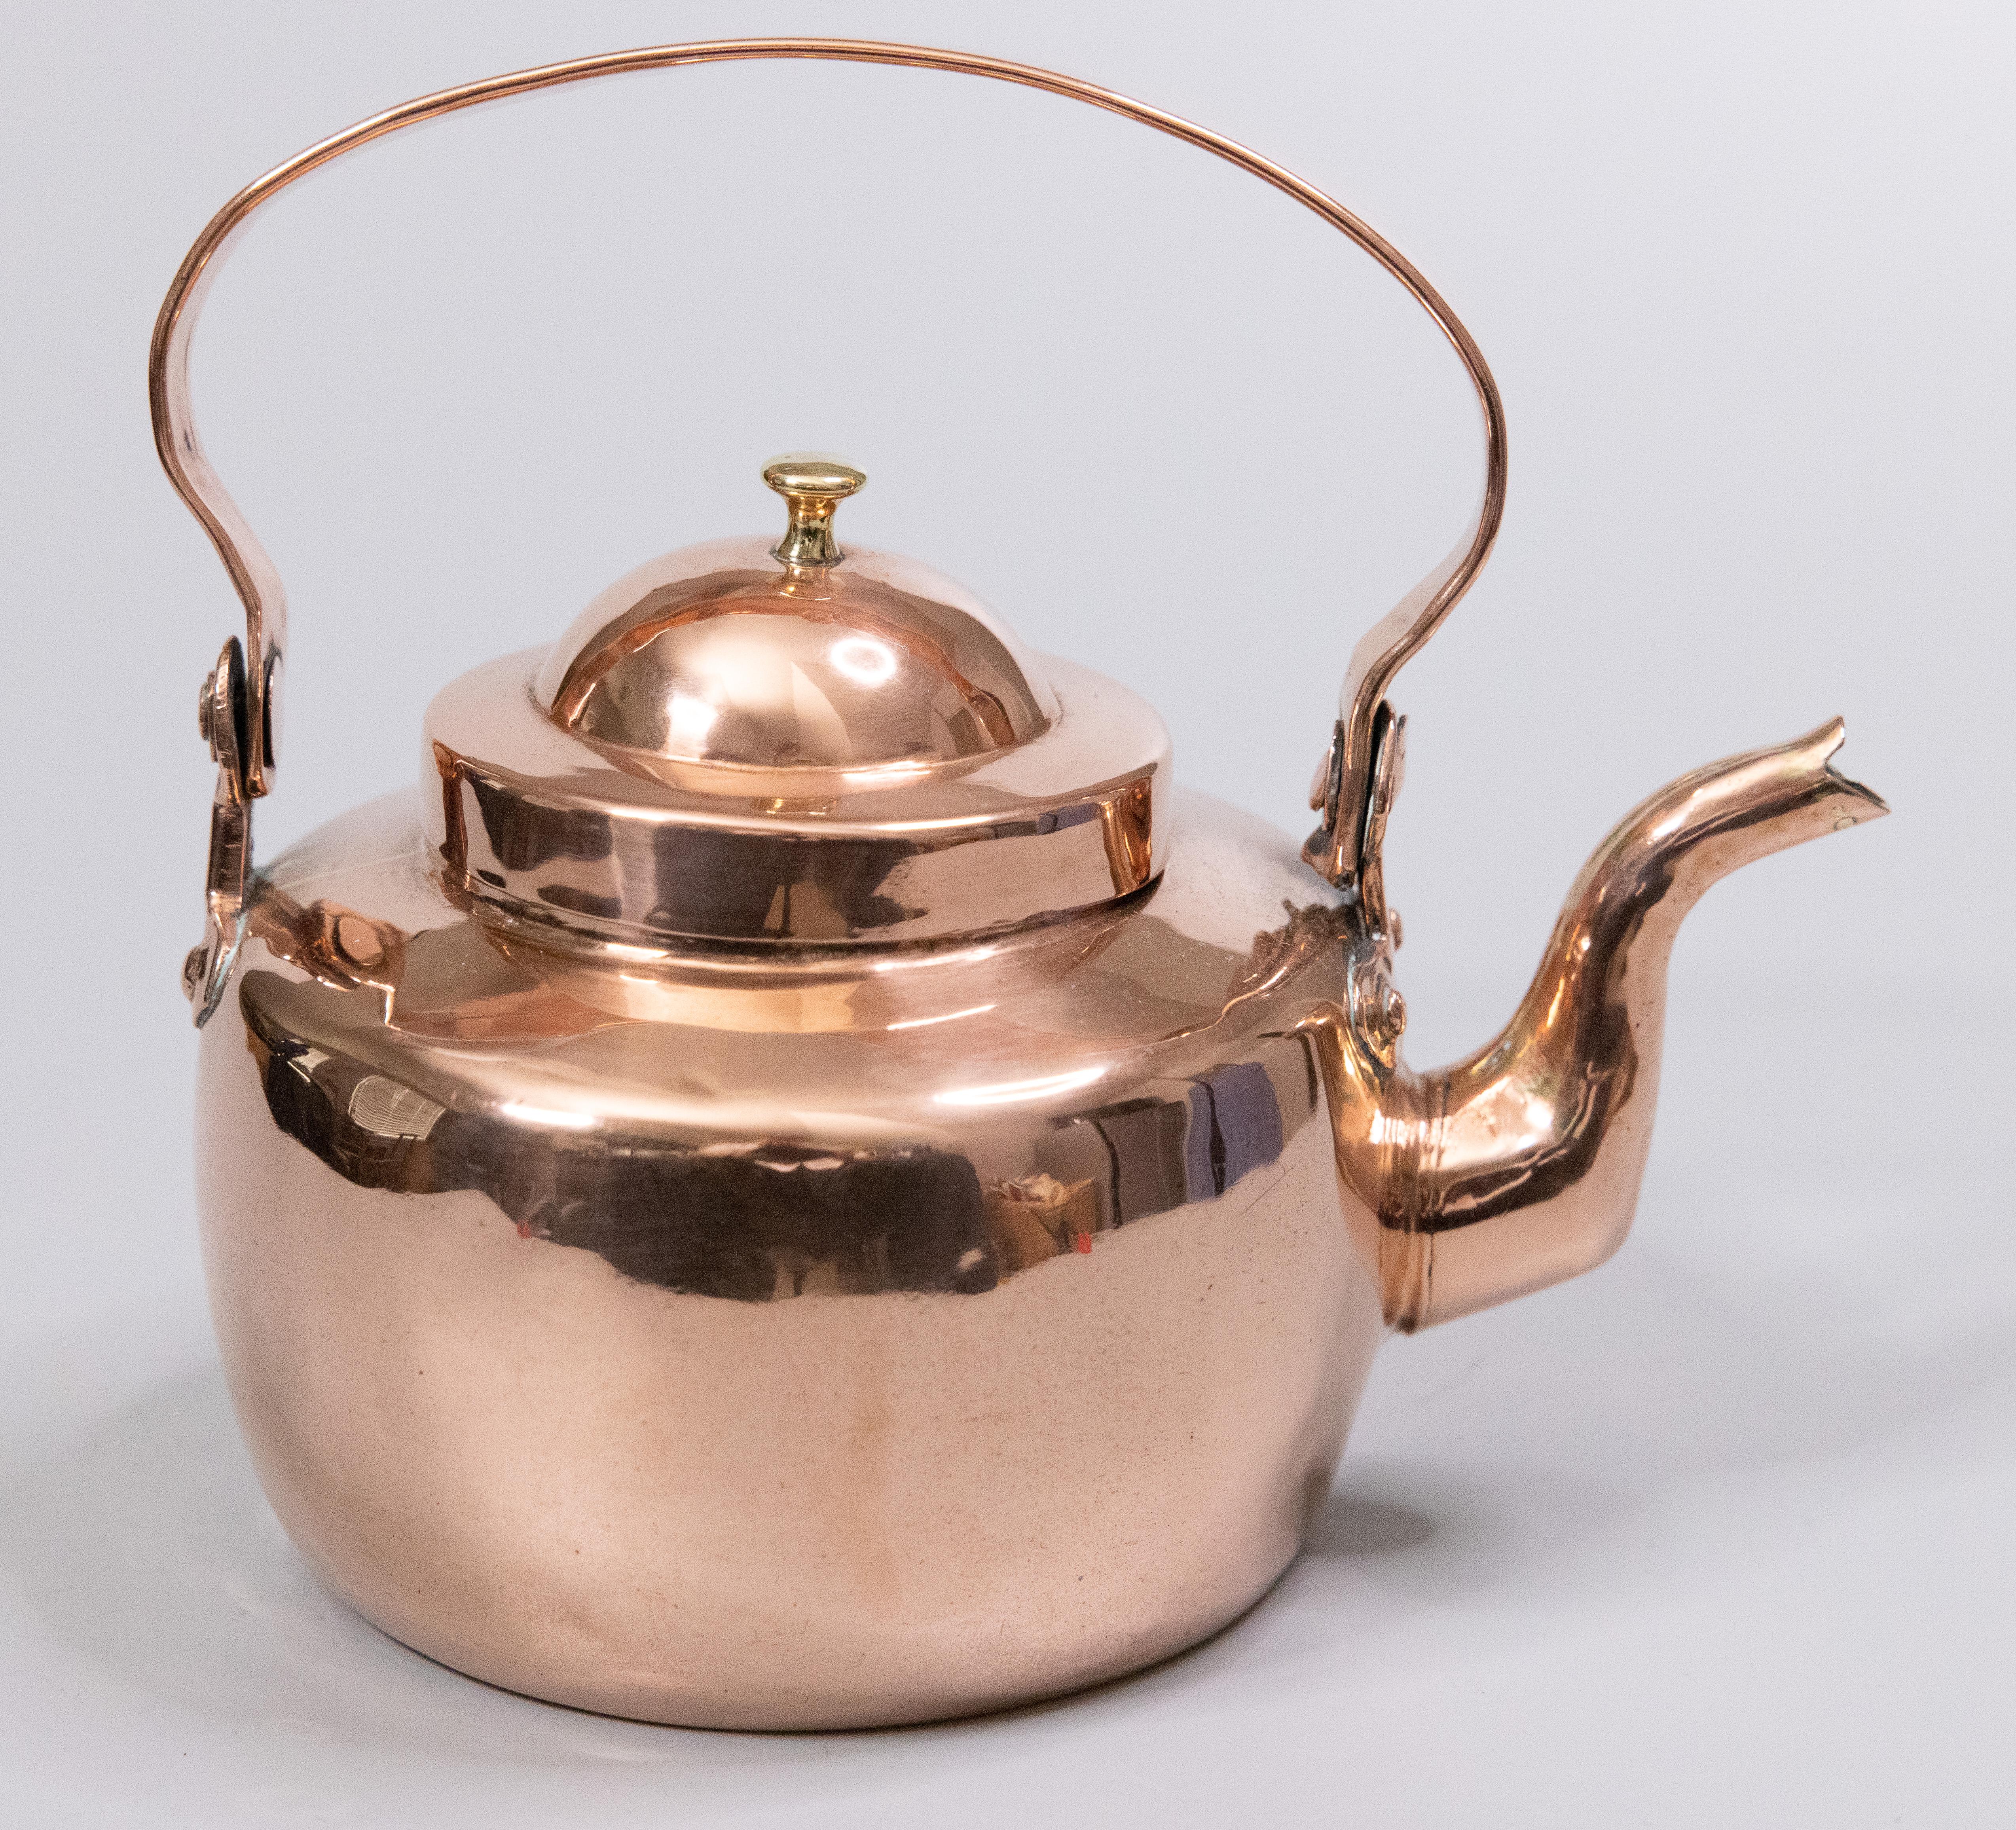 A lovely petite antique Georgian English handmade copper and brass tea kettle or teapot with a swing handle, circa 1820. This would a charming addition to your kitchen decor or to a copper collection. It is 6.25